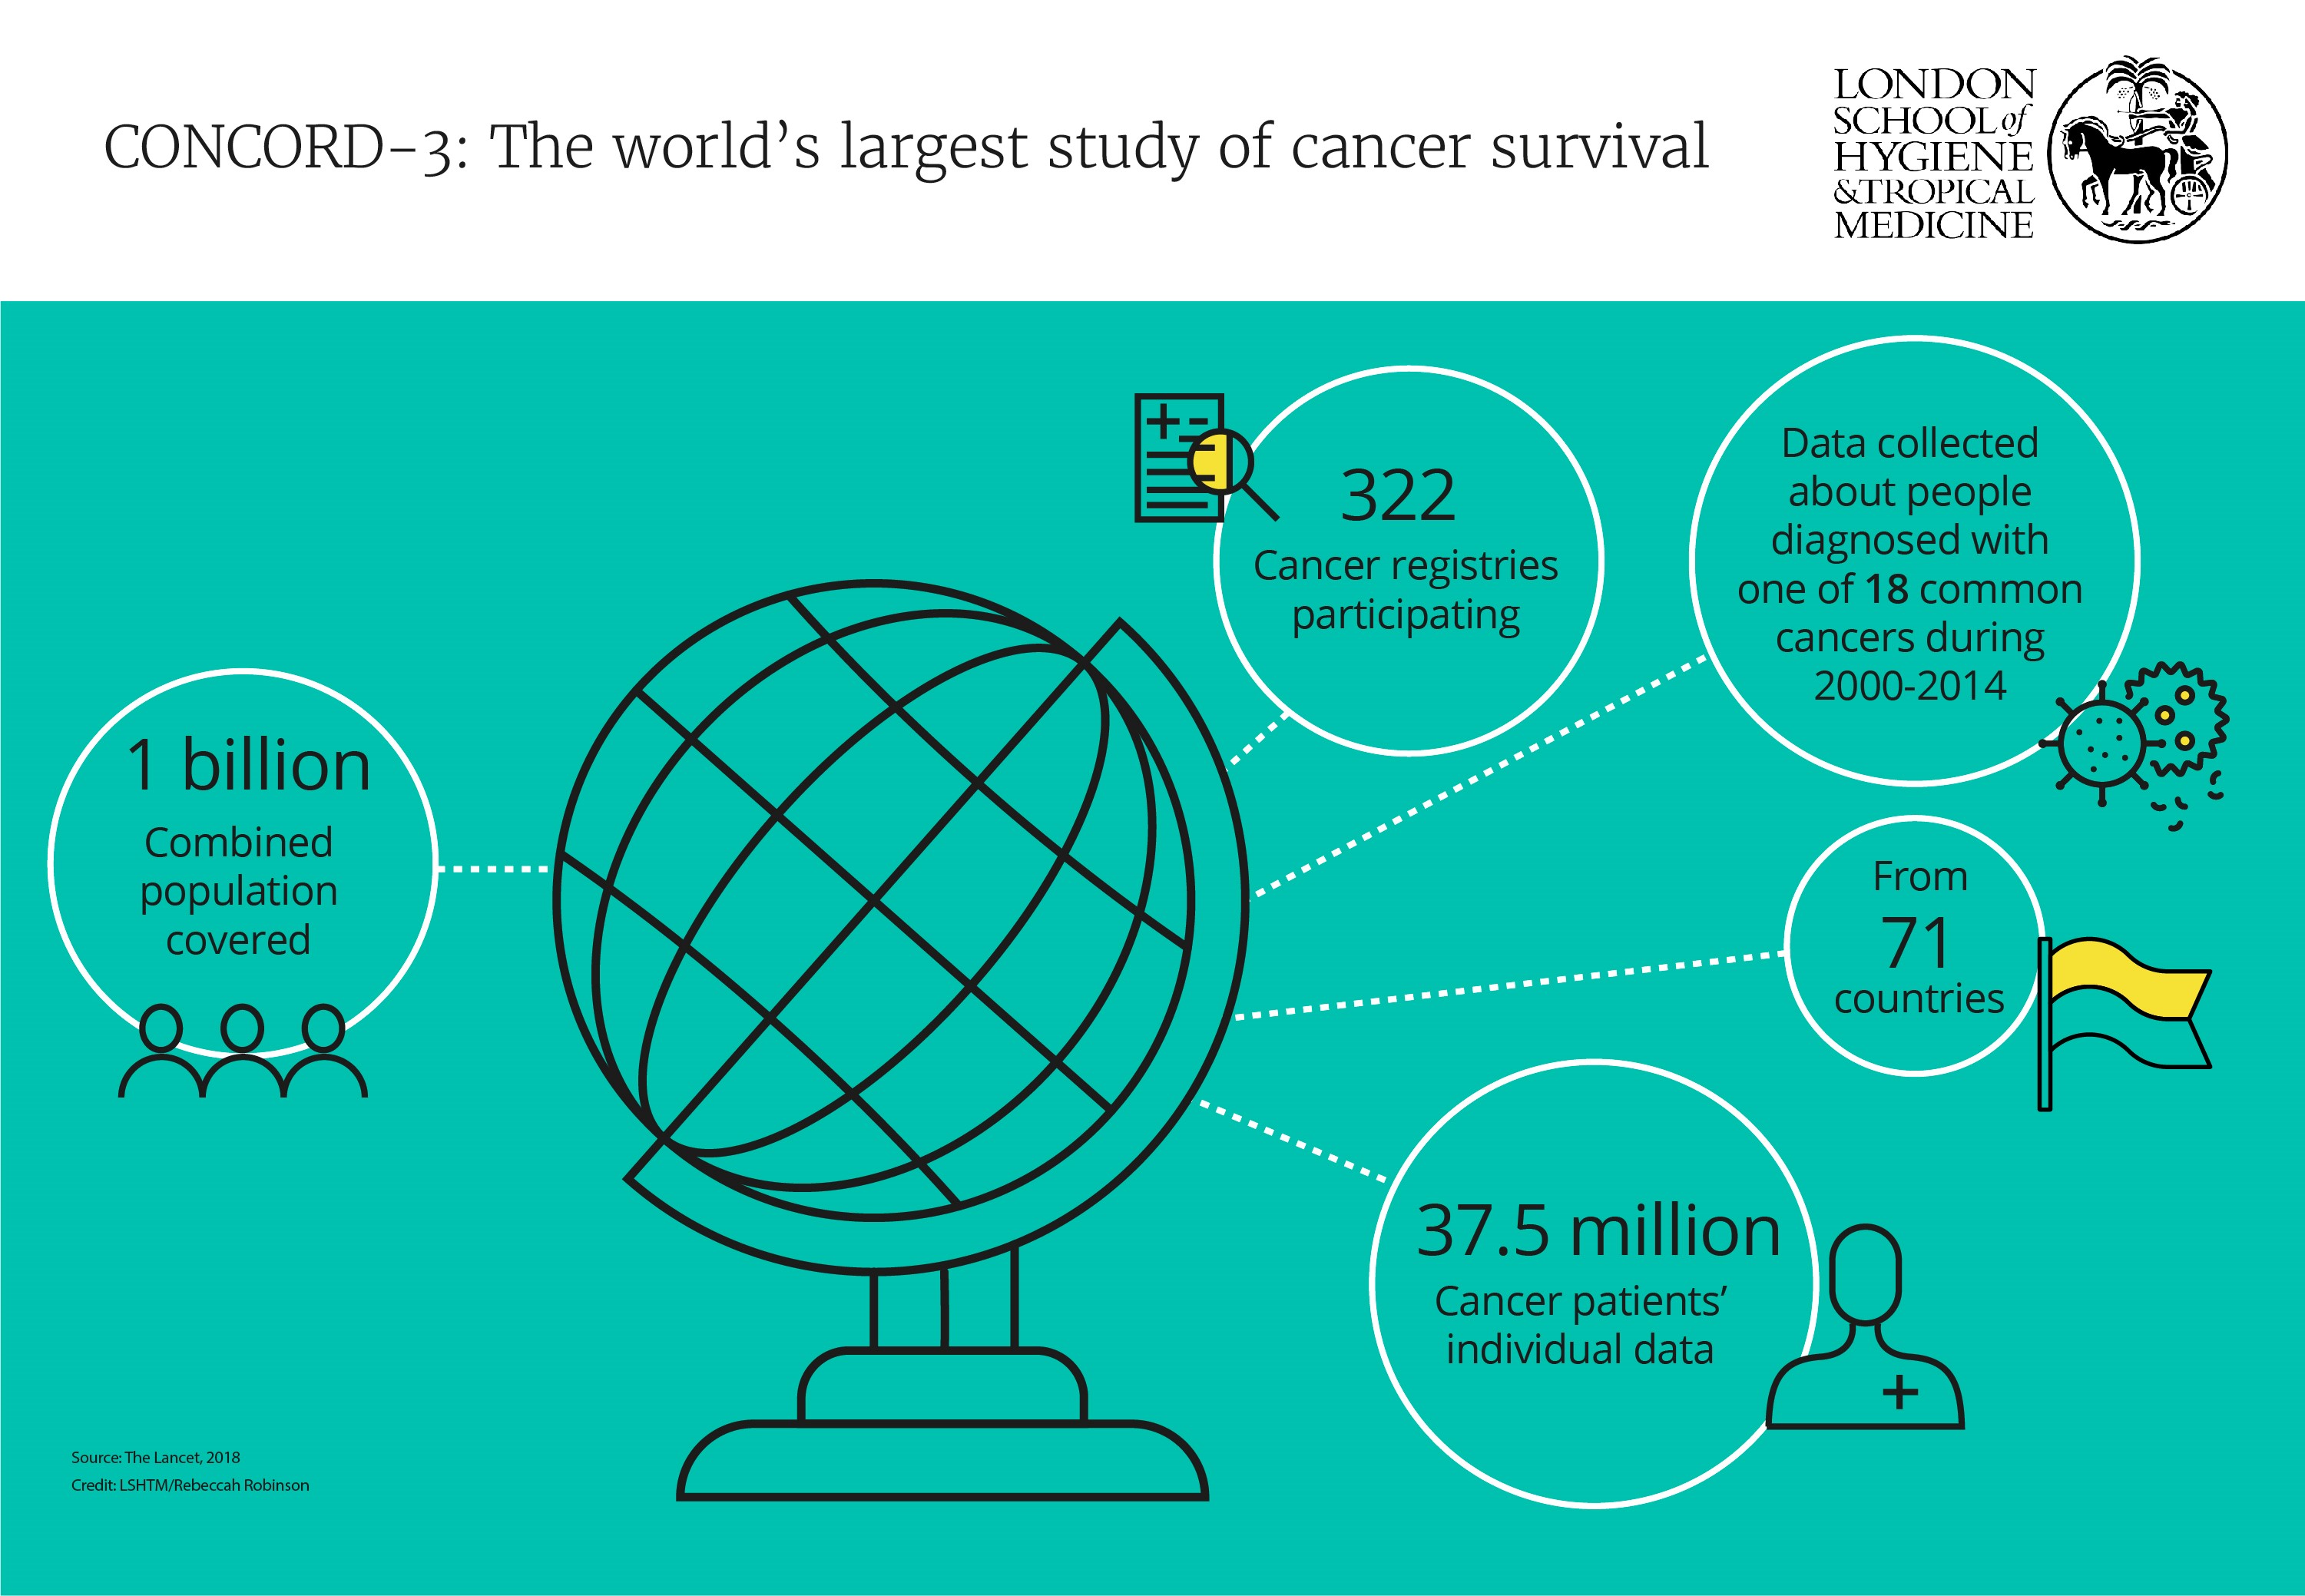 CONCORD-3: the world's largest study of cancer survival